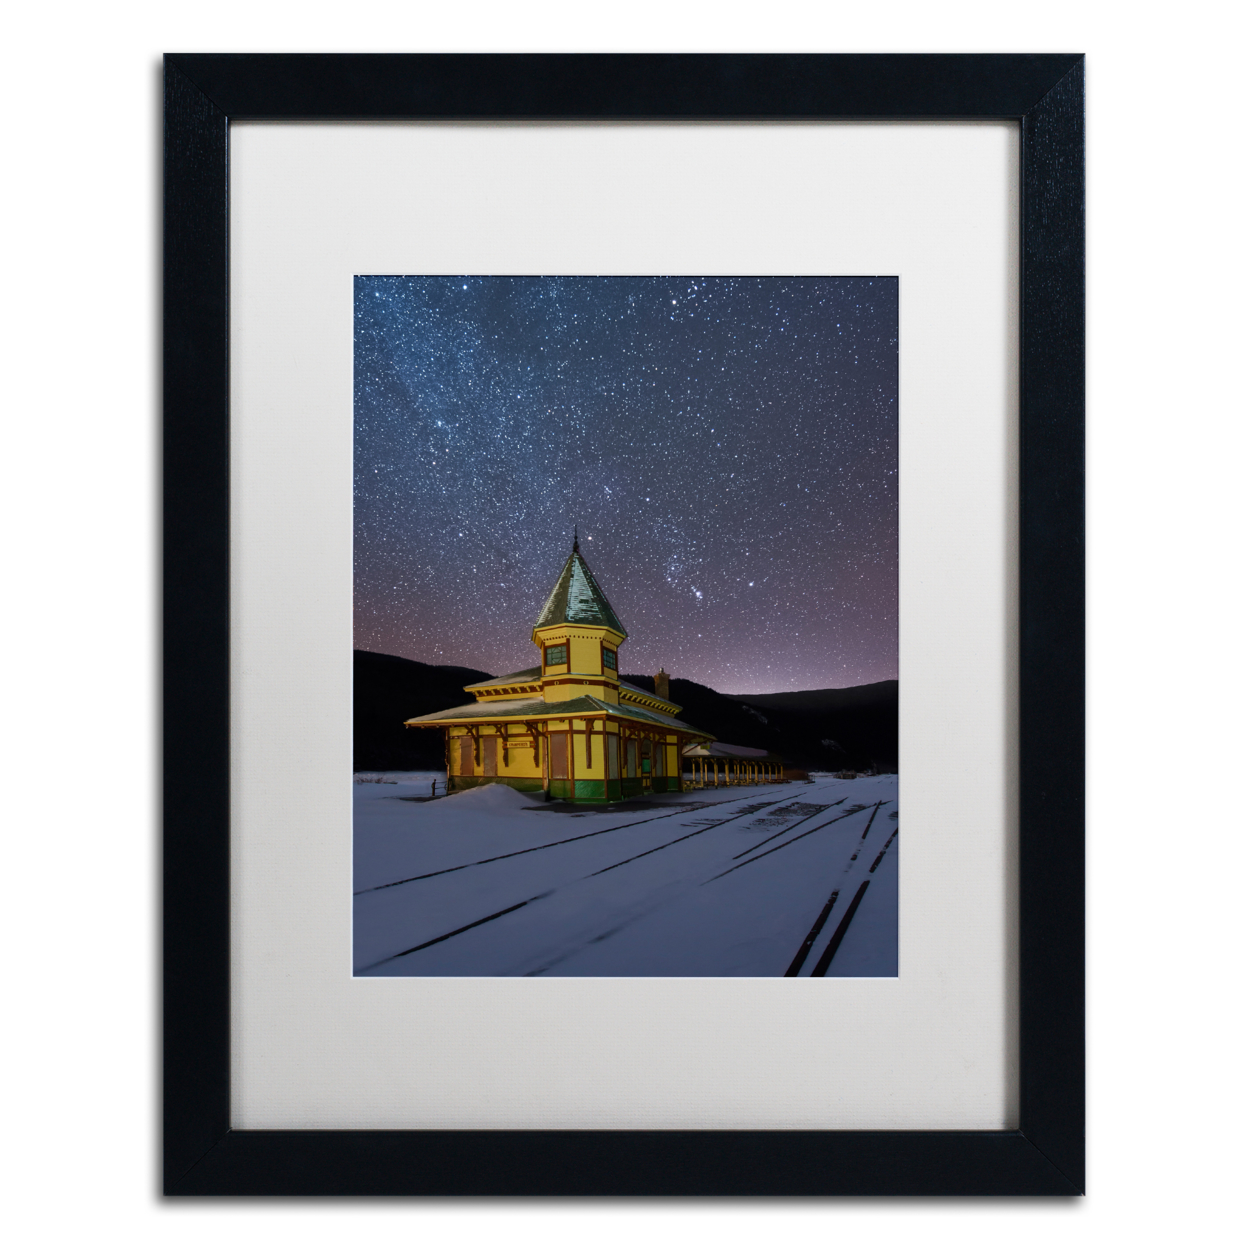 Michael Blanchette Photography 'Night Depot' Black Wooden Framed Art 18 X 22 Inches